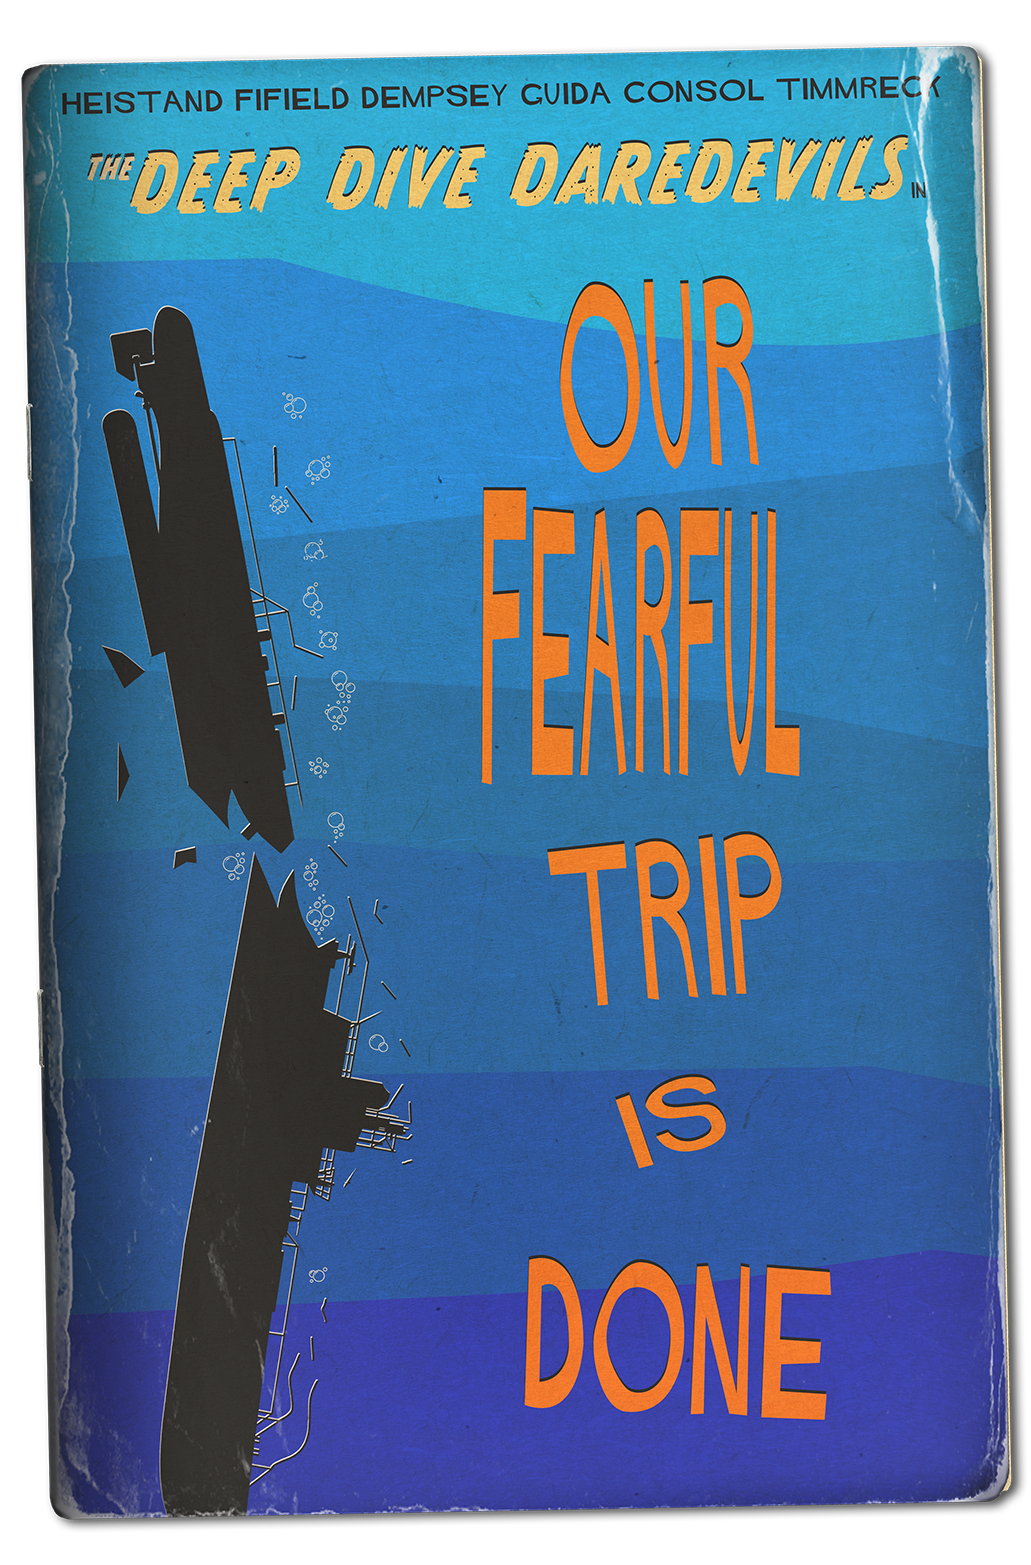 Our Fearful Trip is Done – Cover